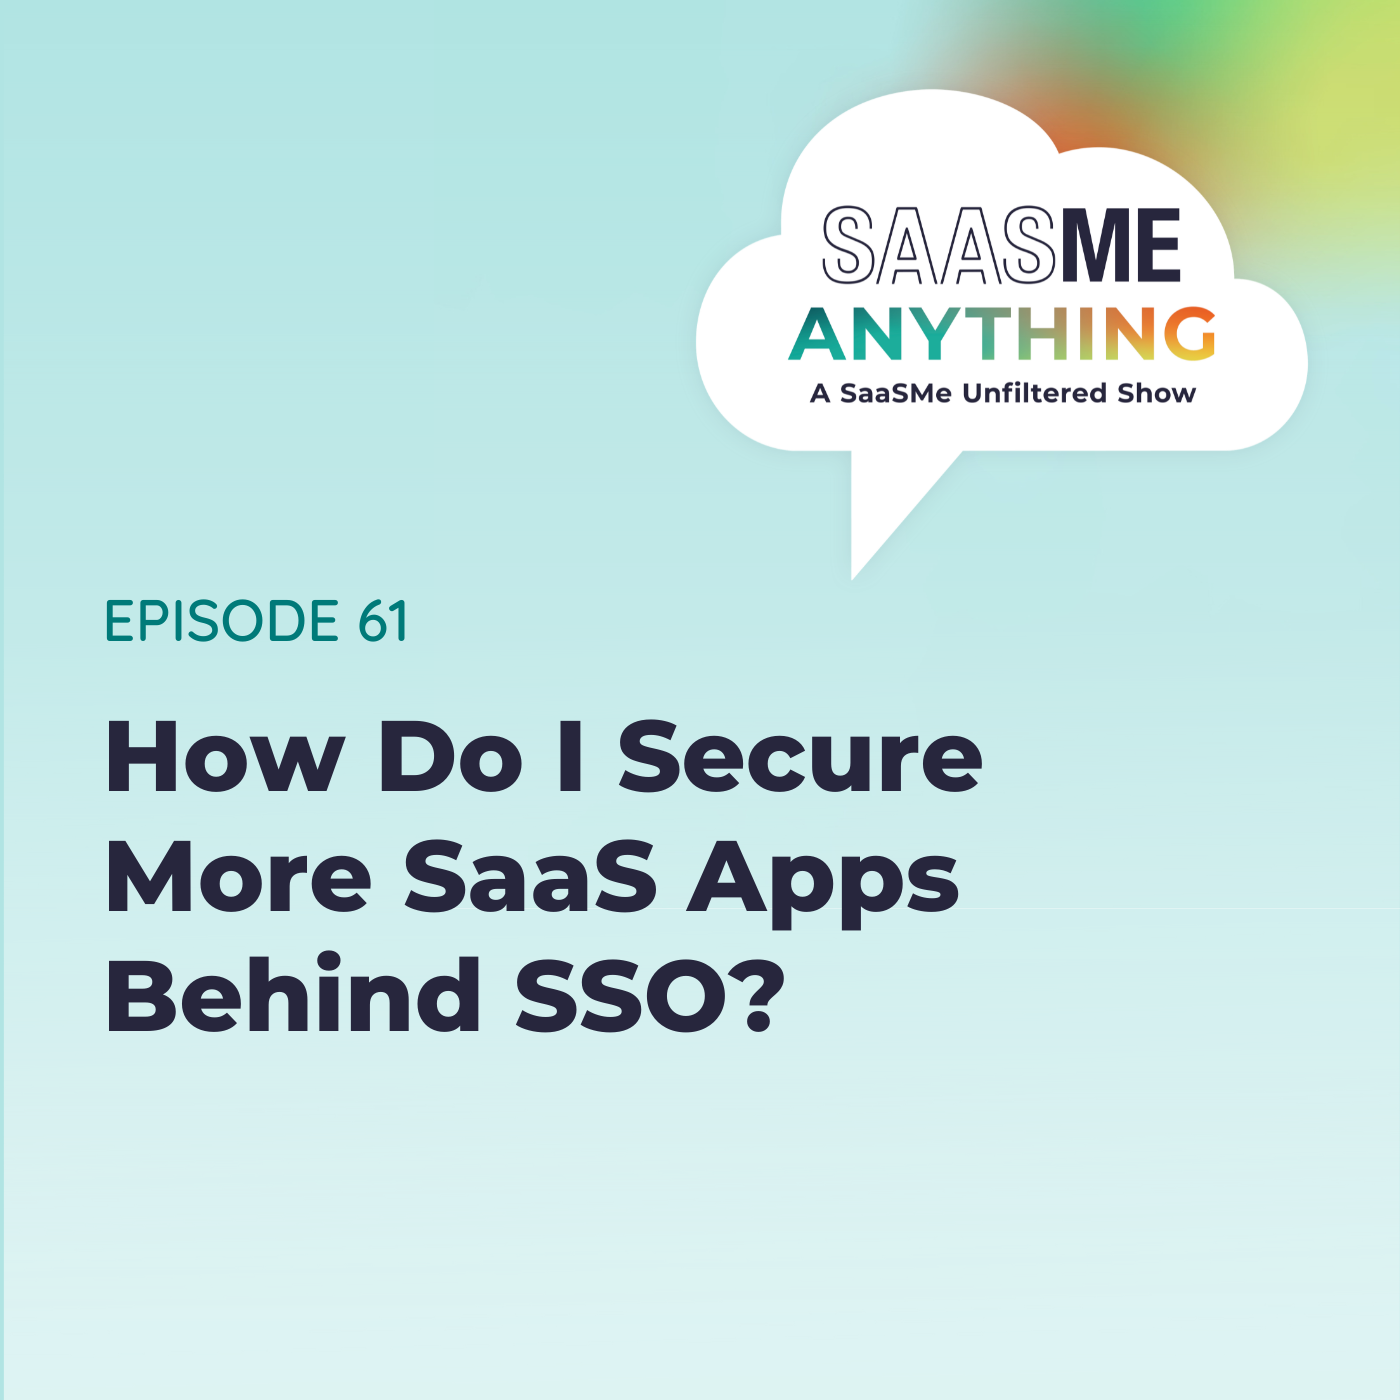 How Do I Secure More SaaS Apps Behind SSO?